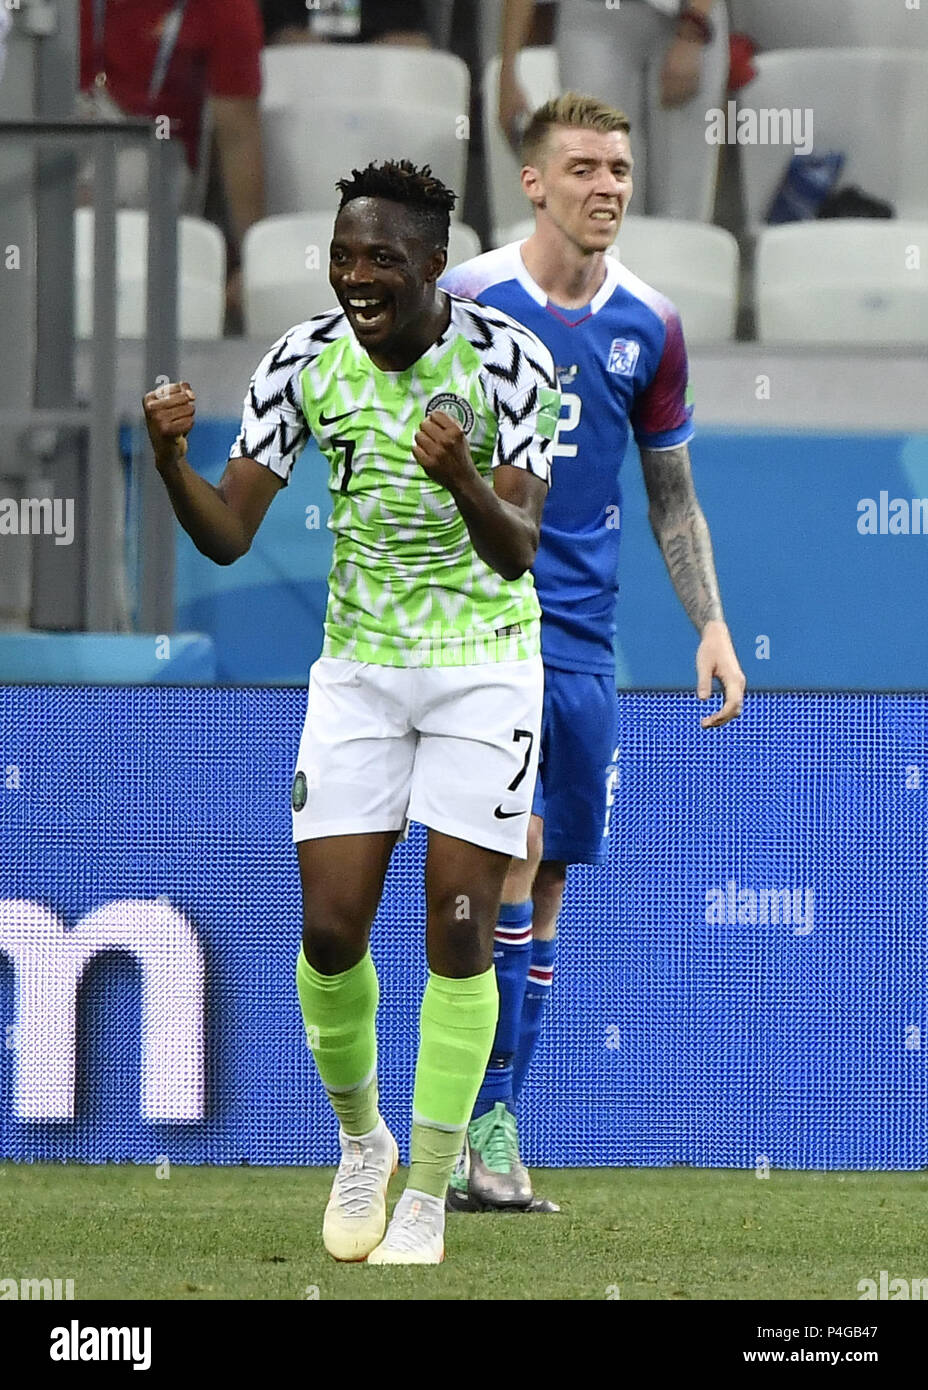 Volgograd, Russia. 22nd June, 2018. Ahmed Musa (front) of Nigeria celebrates victory after the 2018 FIFA World Cup Group D match between Nigeria and Iceland in Volgograd, Russia, June 22, 2018. Nigeria won 2-0. Credit: He Canling/Xinhua/Alamy Live News Stock Photo